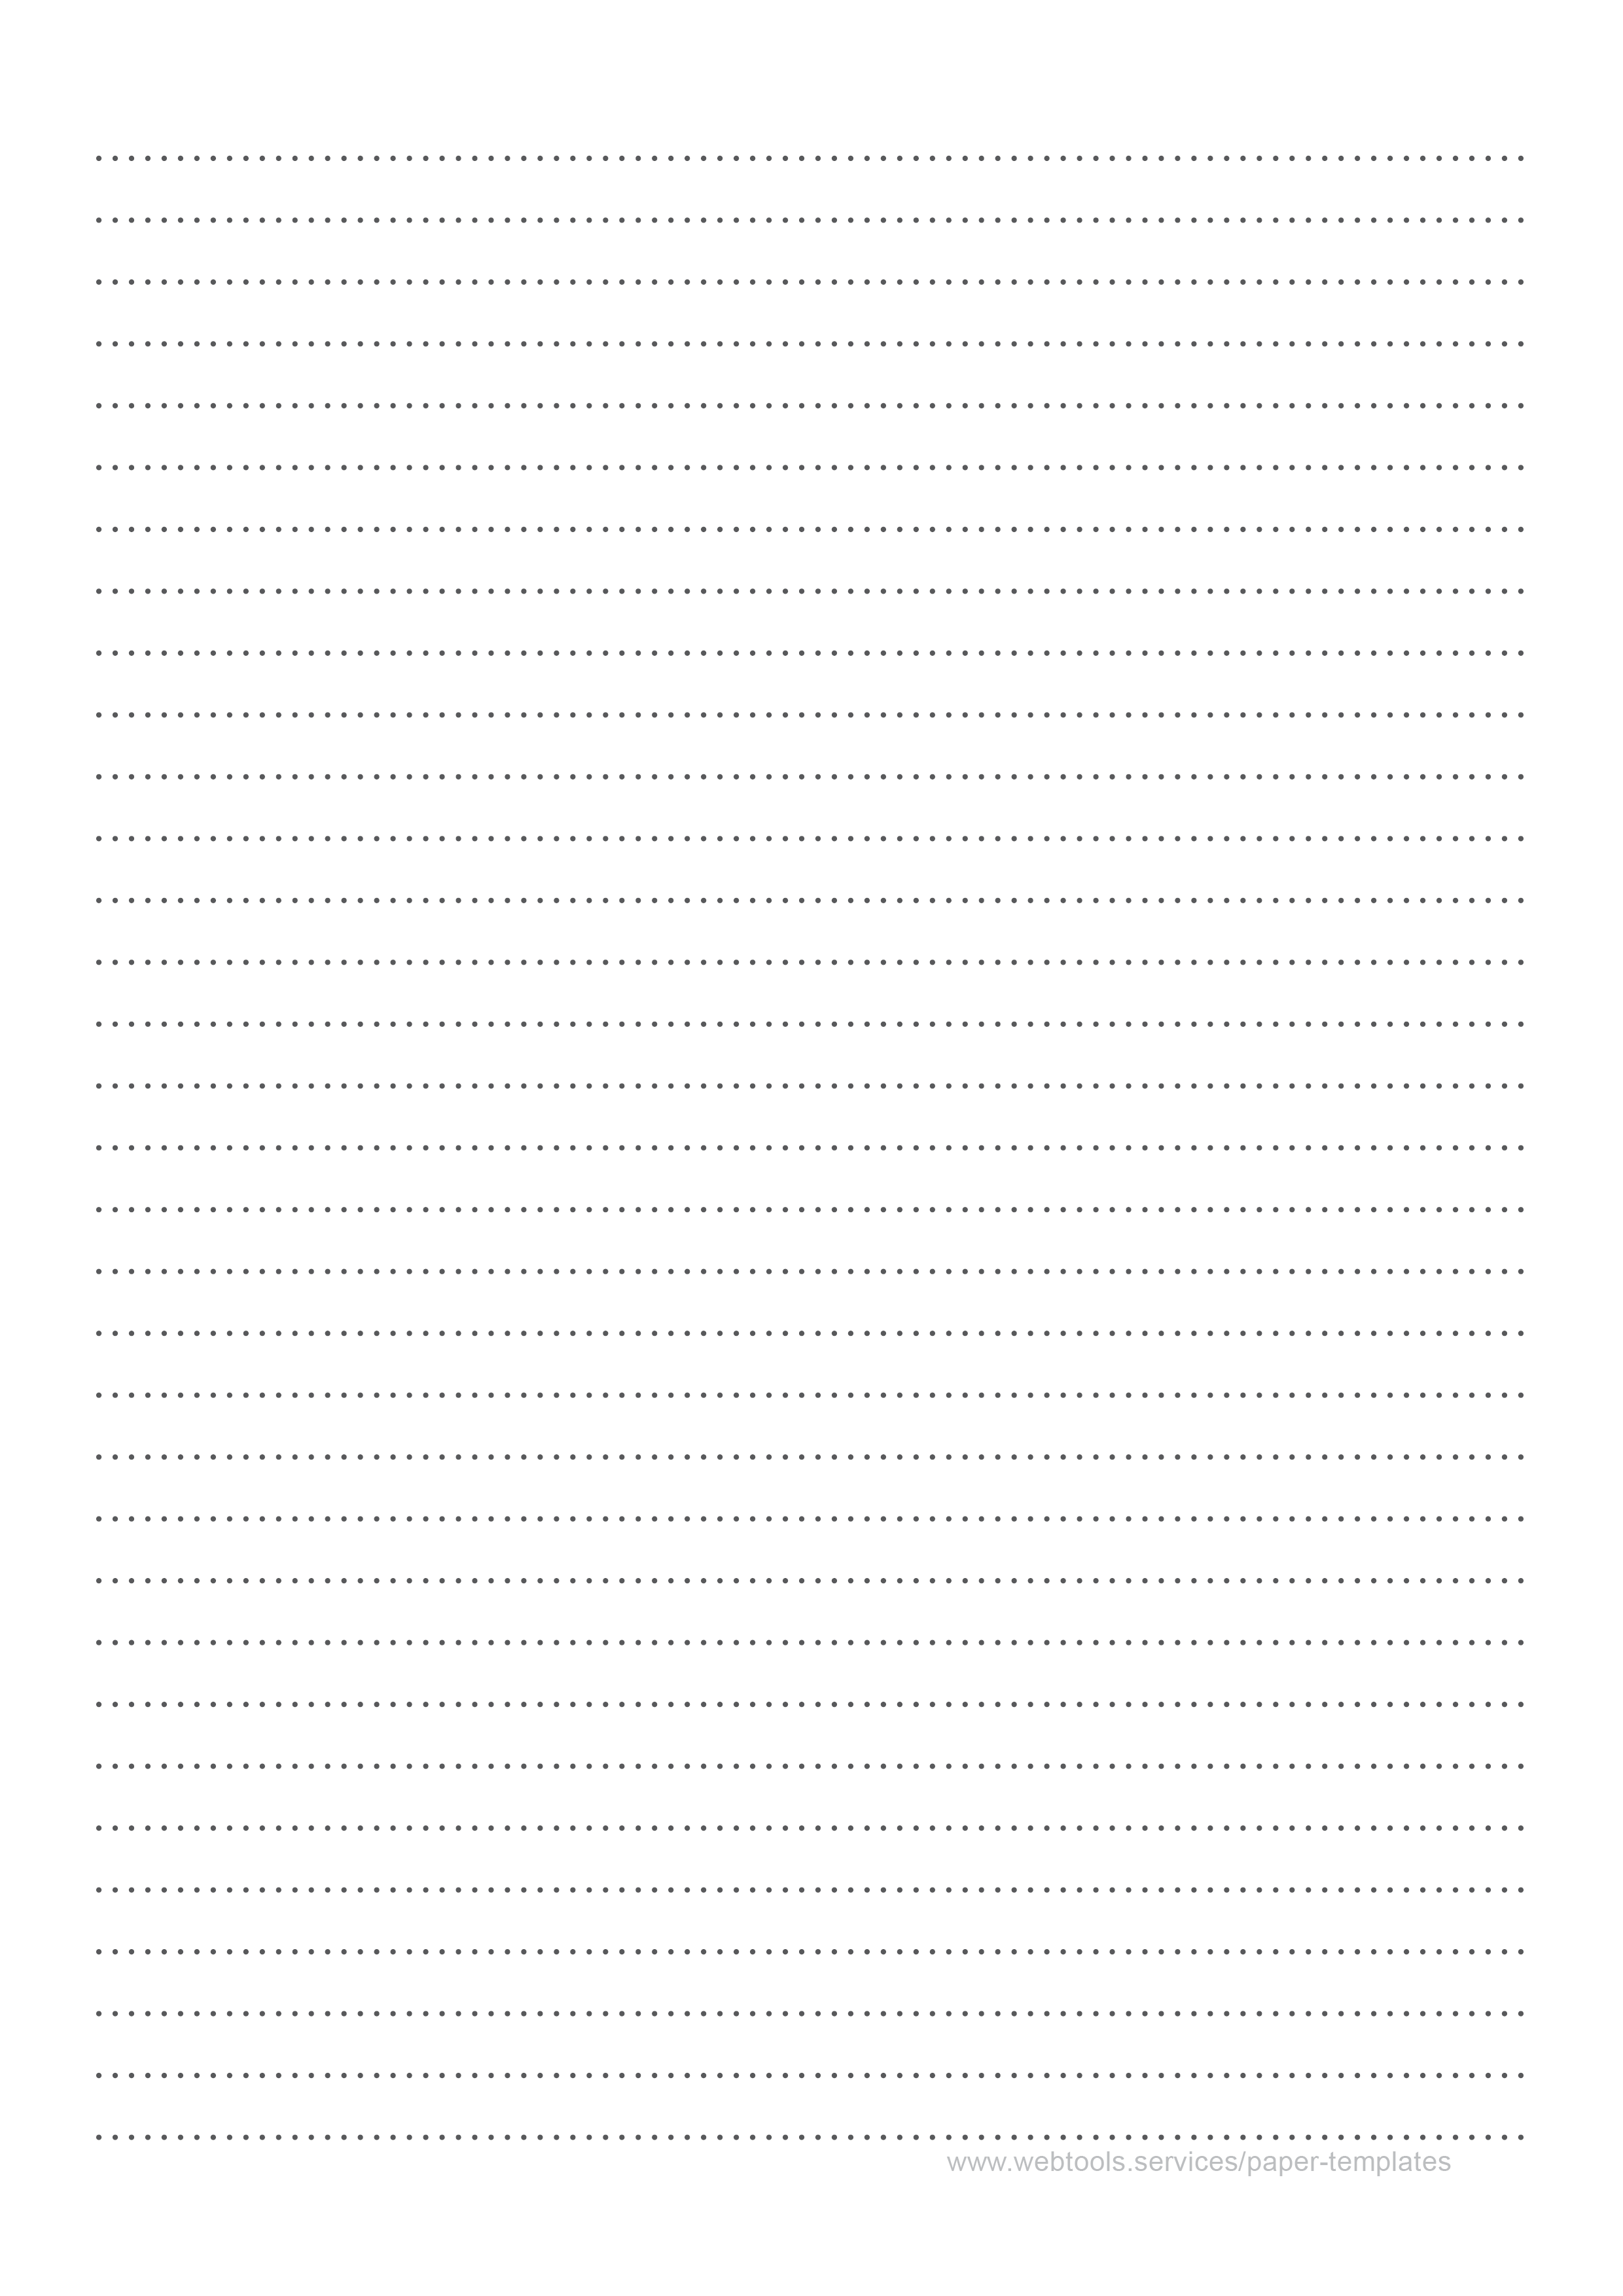 Printable Dotted Black Lined Paper Template With 8 mm Line Height